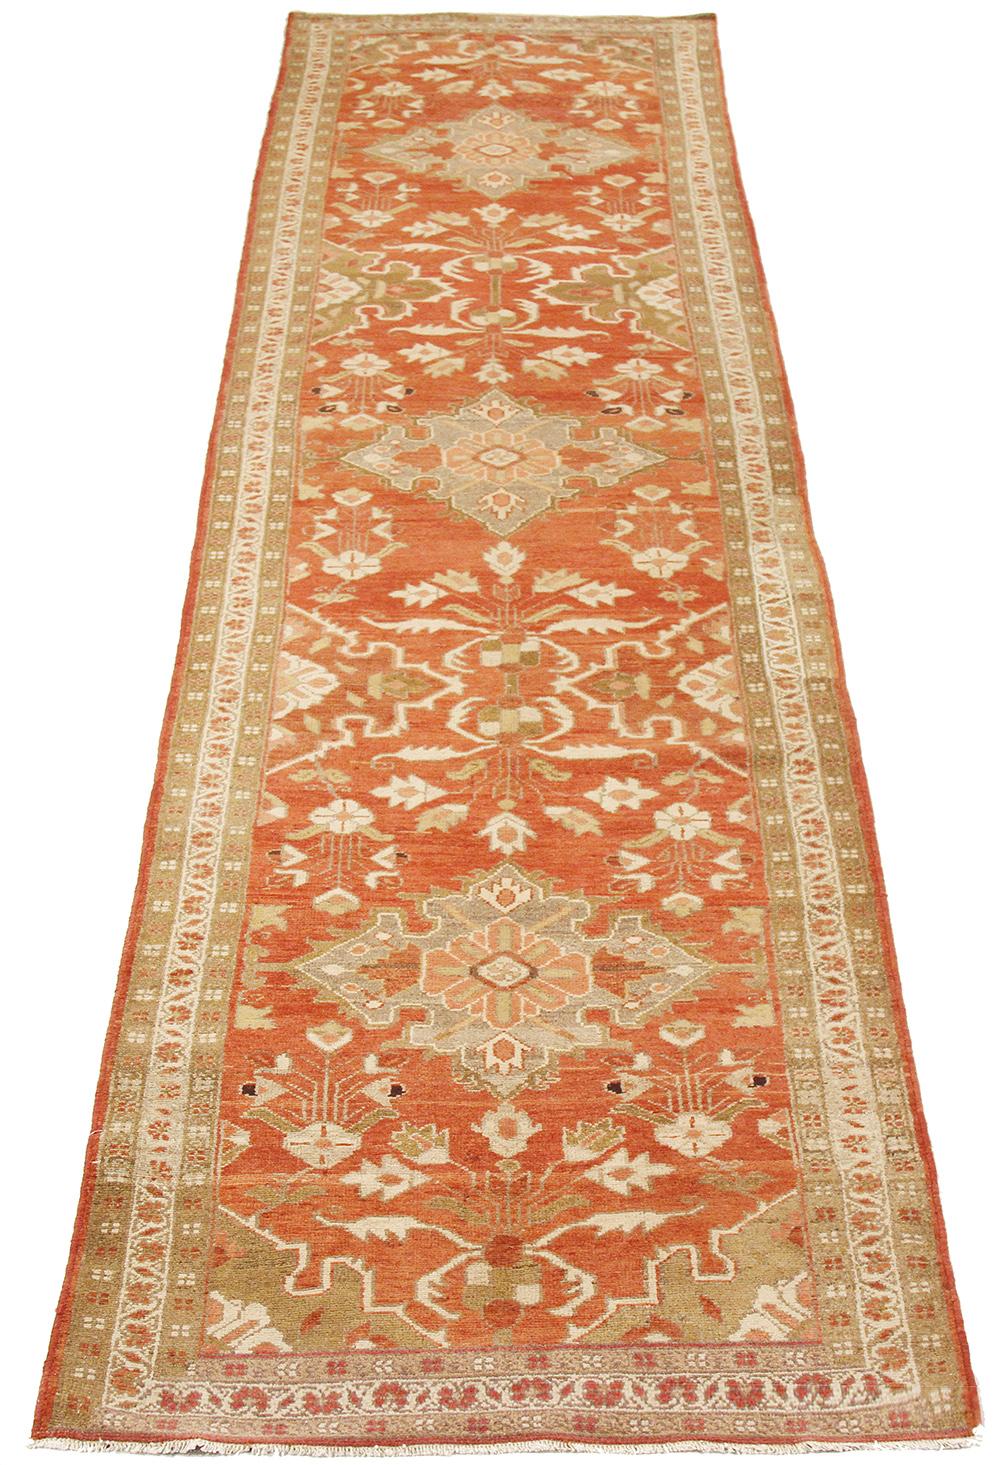 Antique Persian rug handwoven from the finest sheep’s wool and colored with all-natural vegetable dyes that are safe for humans and pets. It’s a traditional Malayer design featuring ivory and green floral details on a red field. It’s a lovely piece